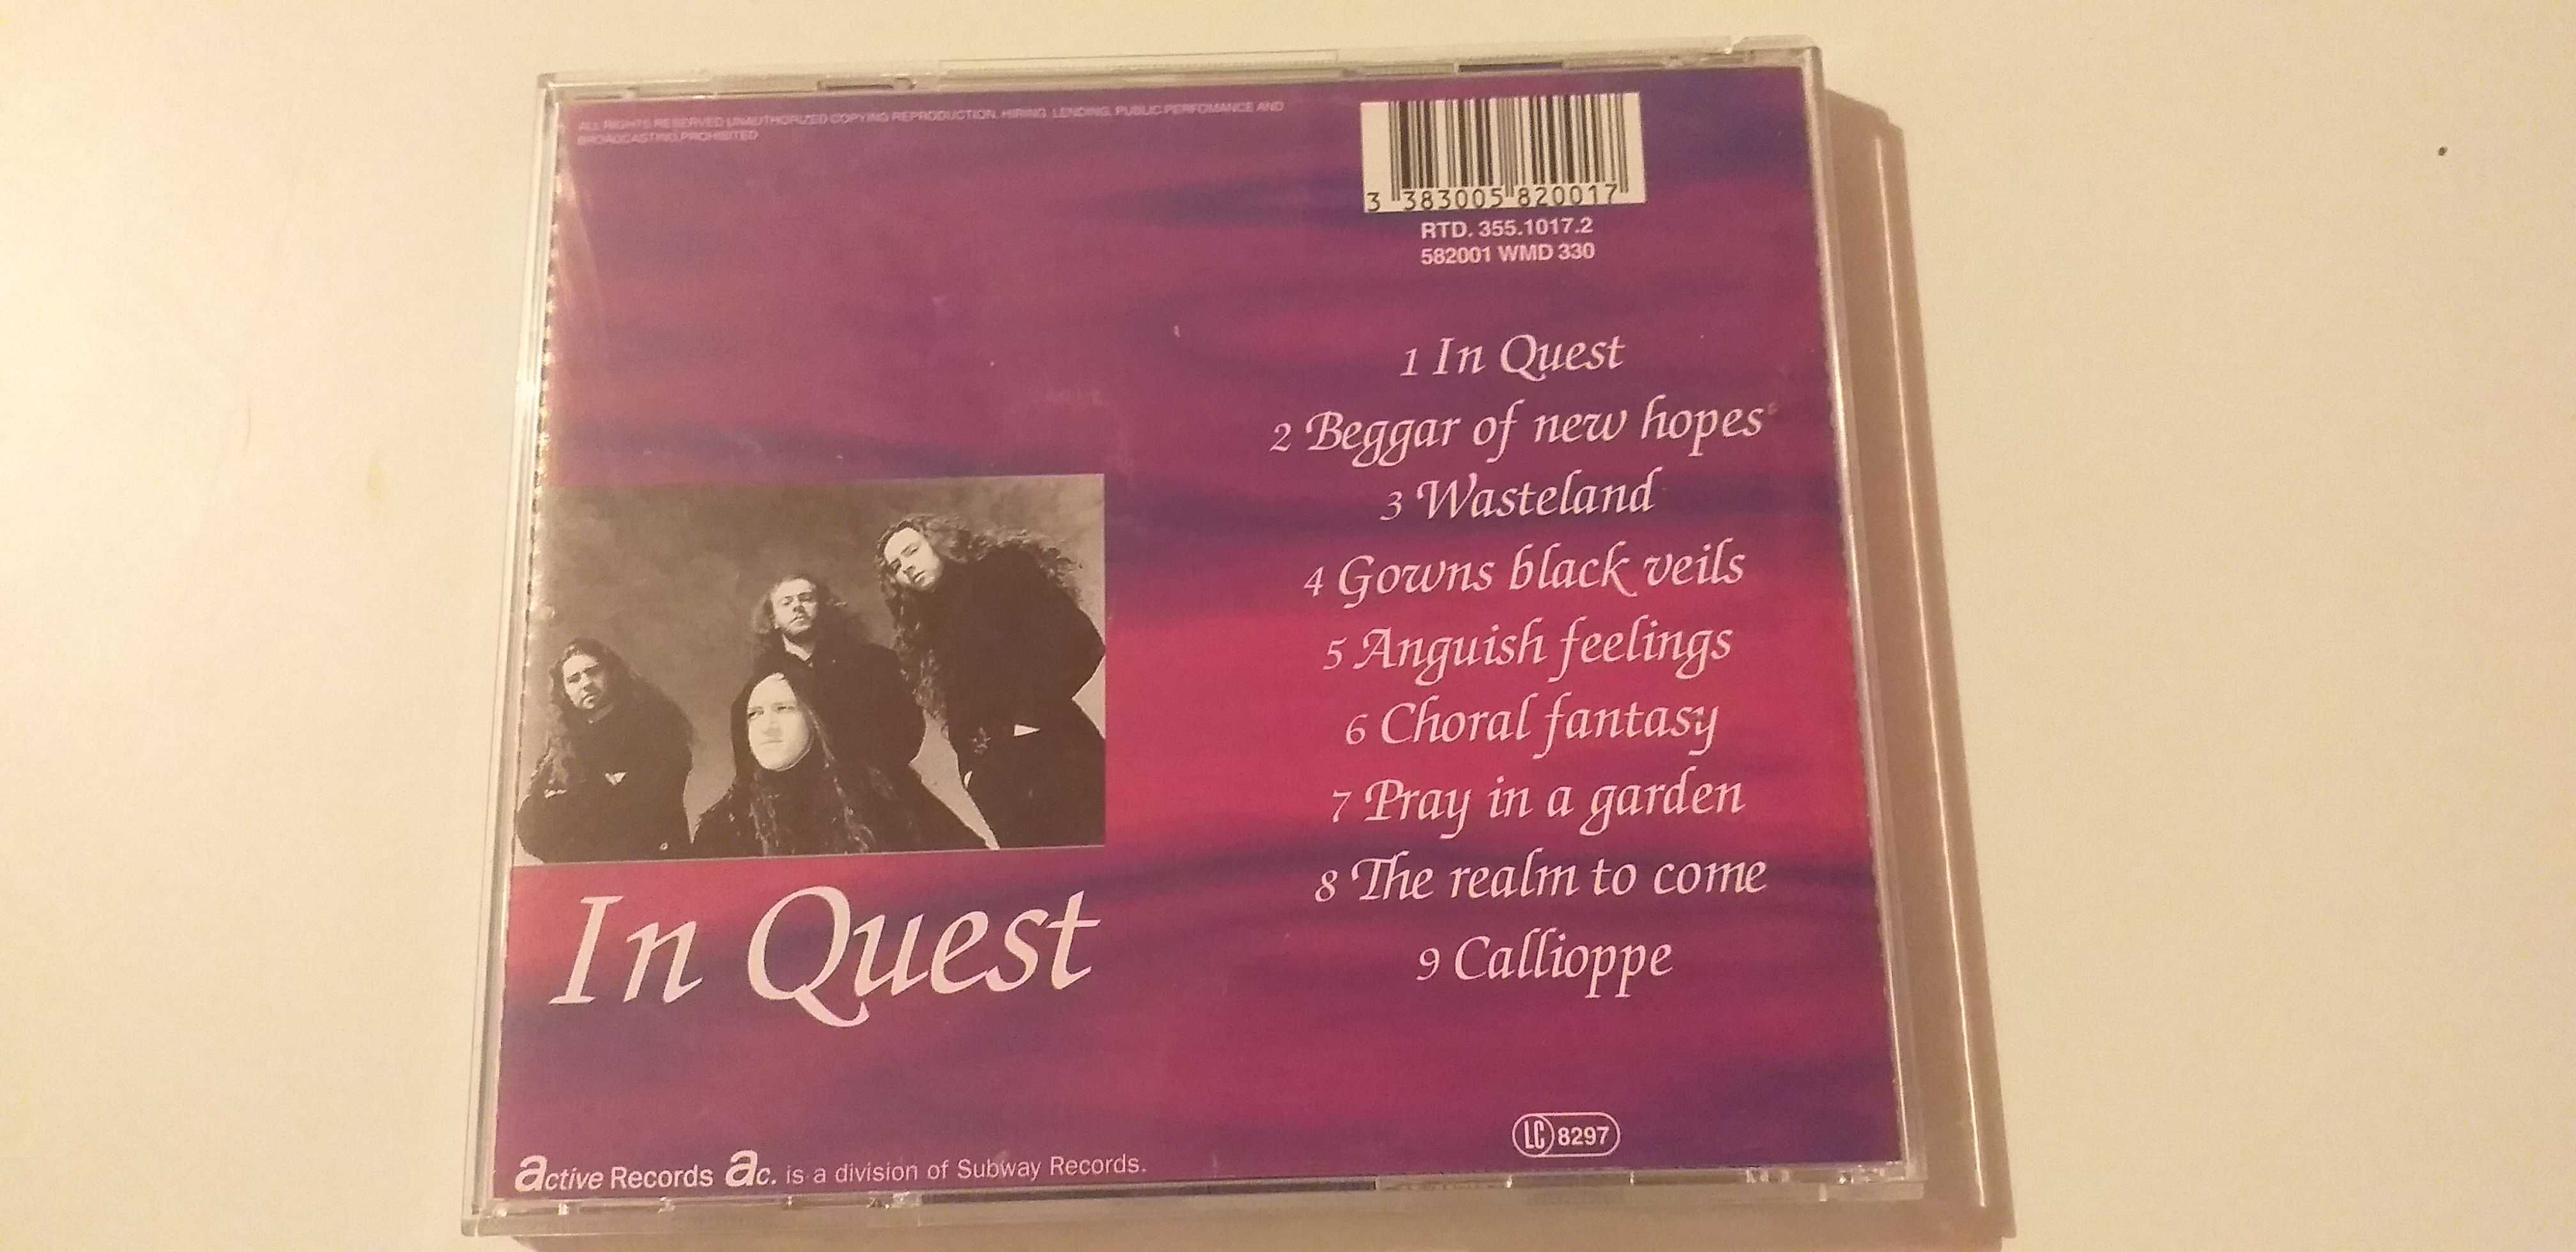 Astral Rising - " In Quest " - CD - portes incluidos